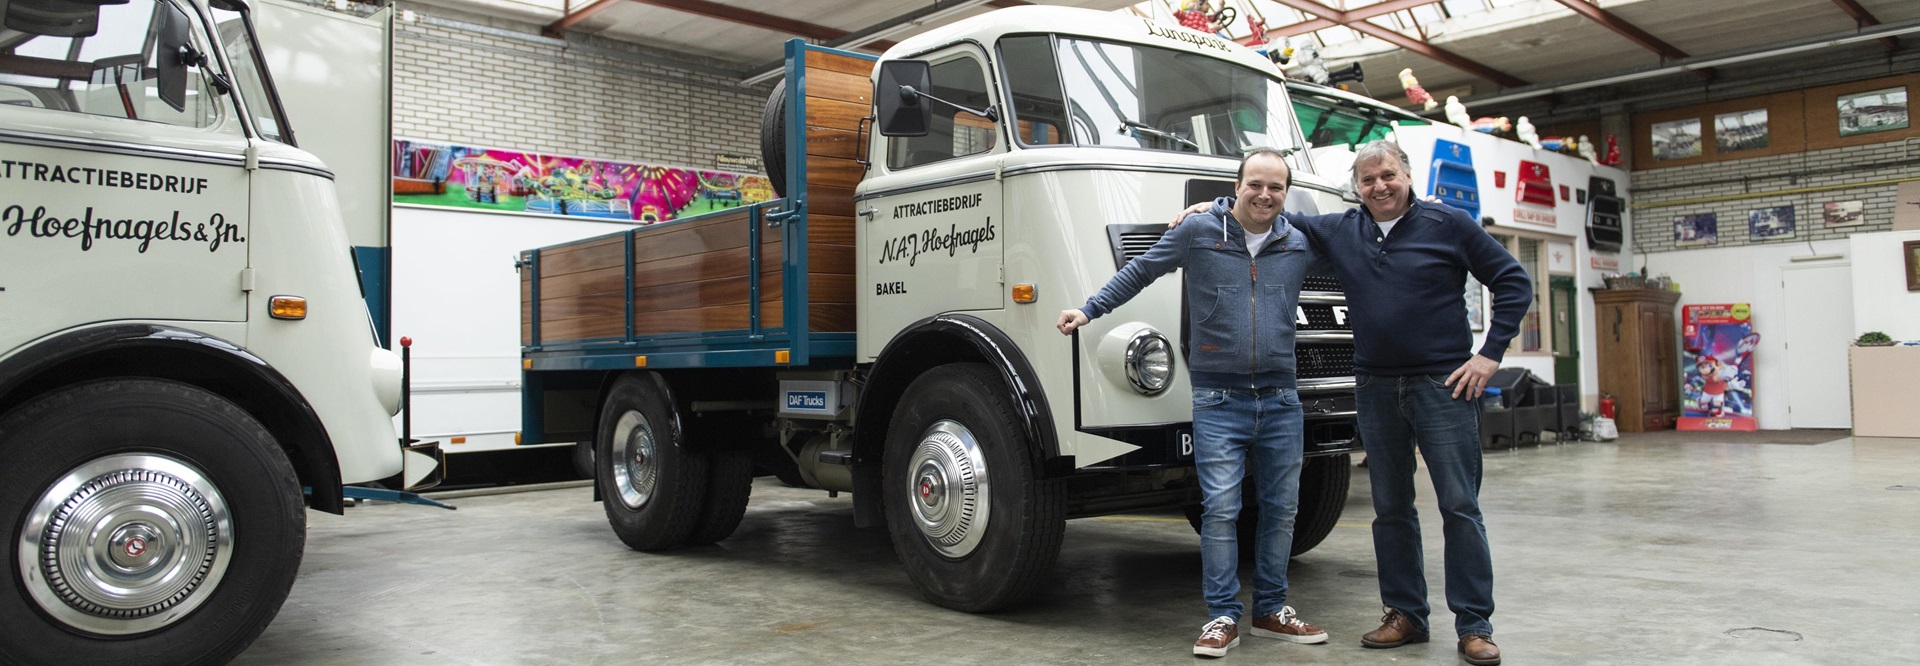 Oldest-DAF-truck-still-in-commercial-Use-DAF-A1600-from-1968